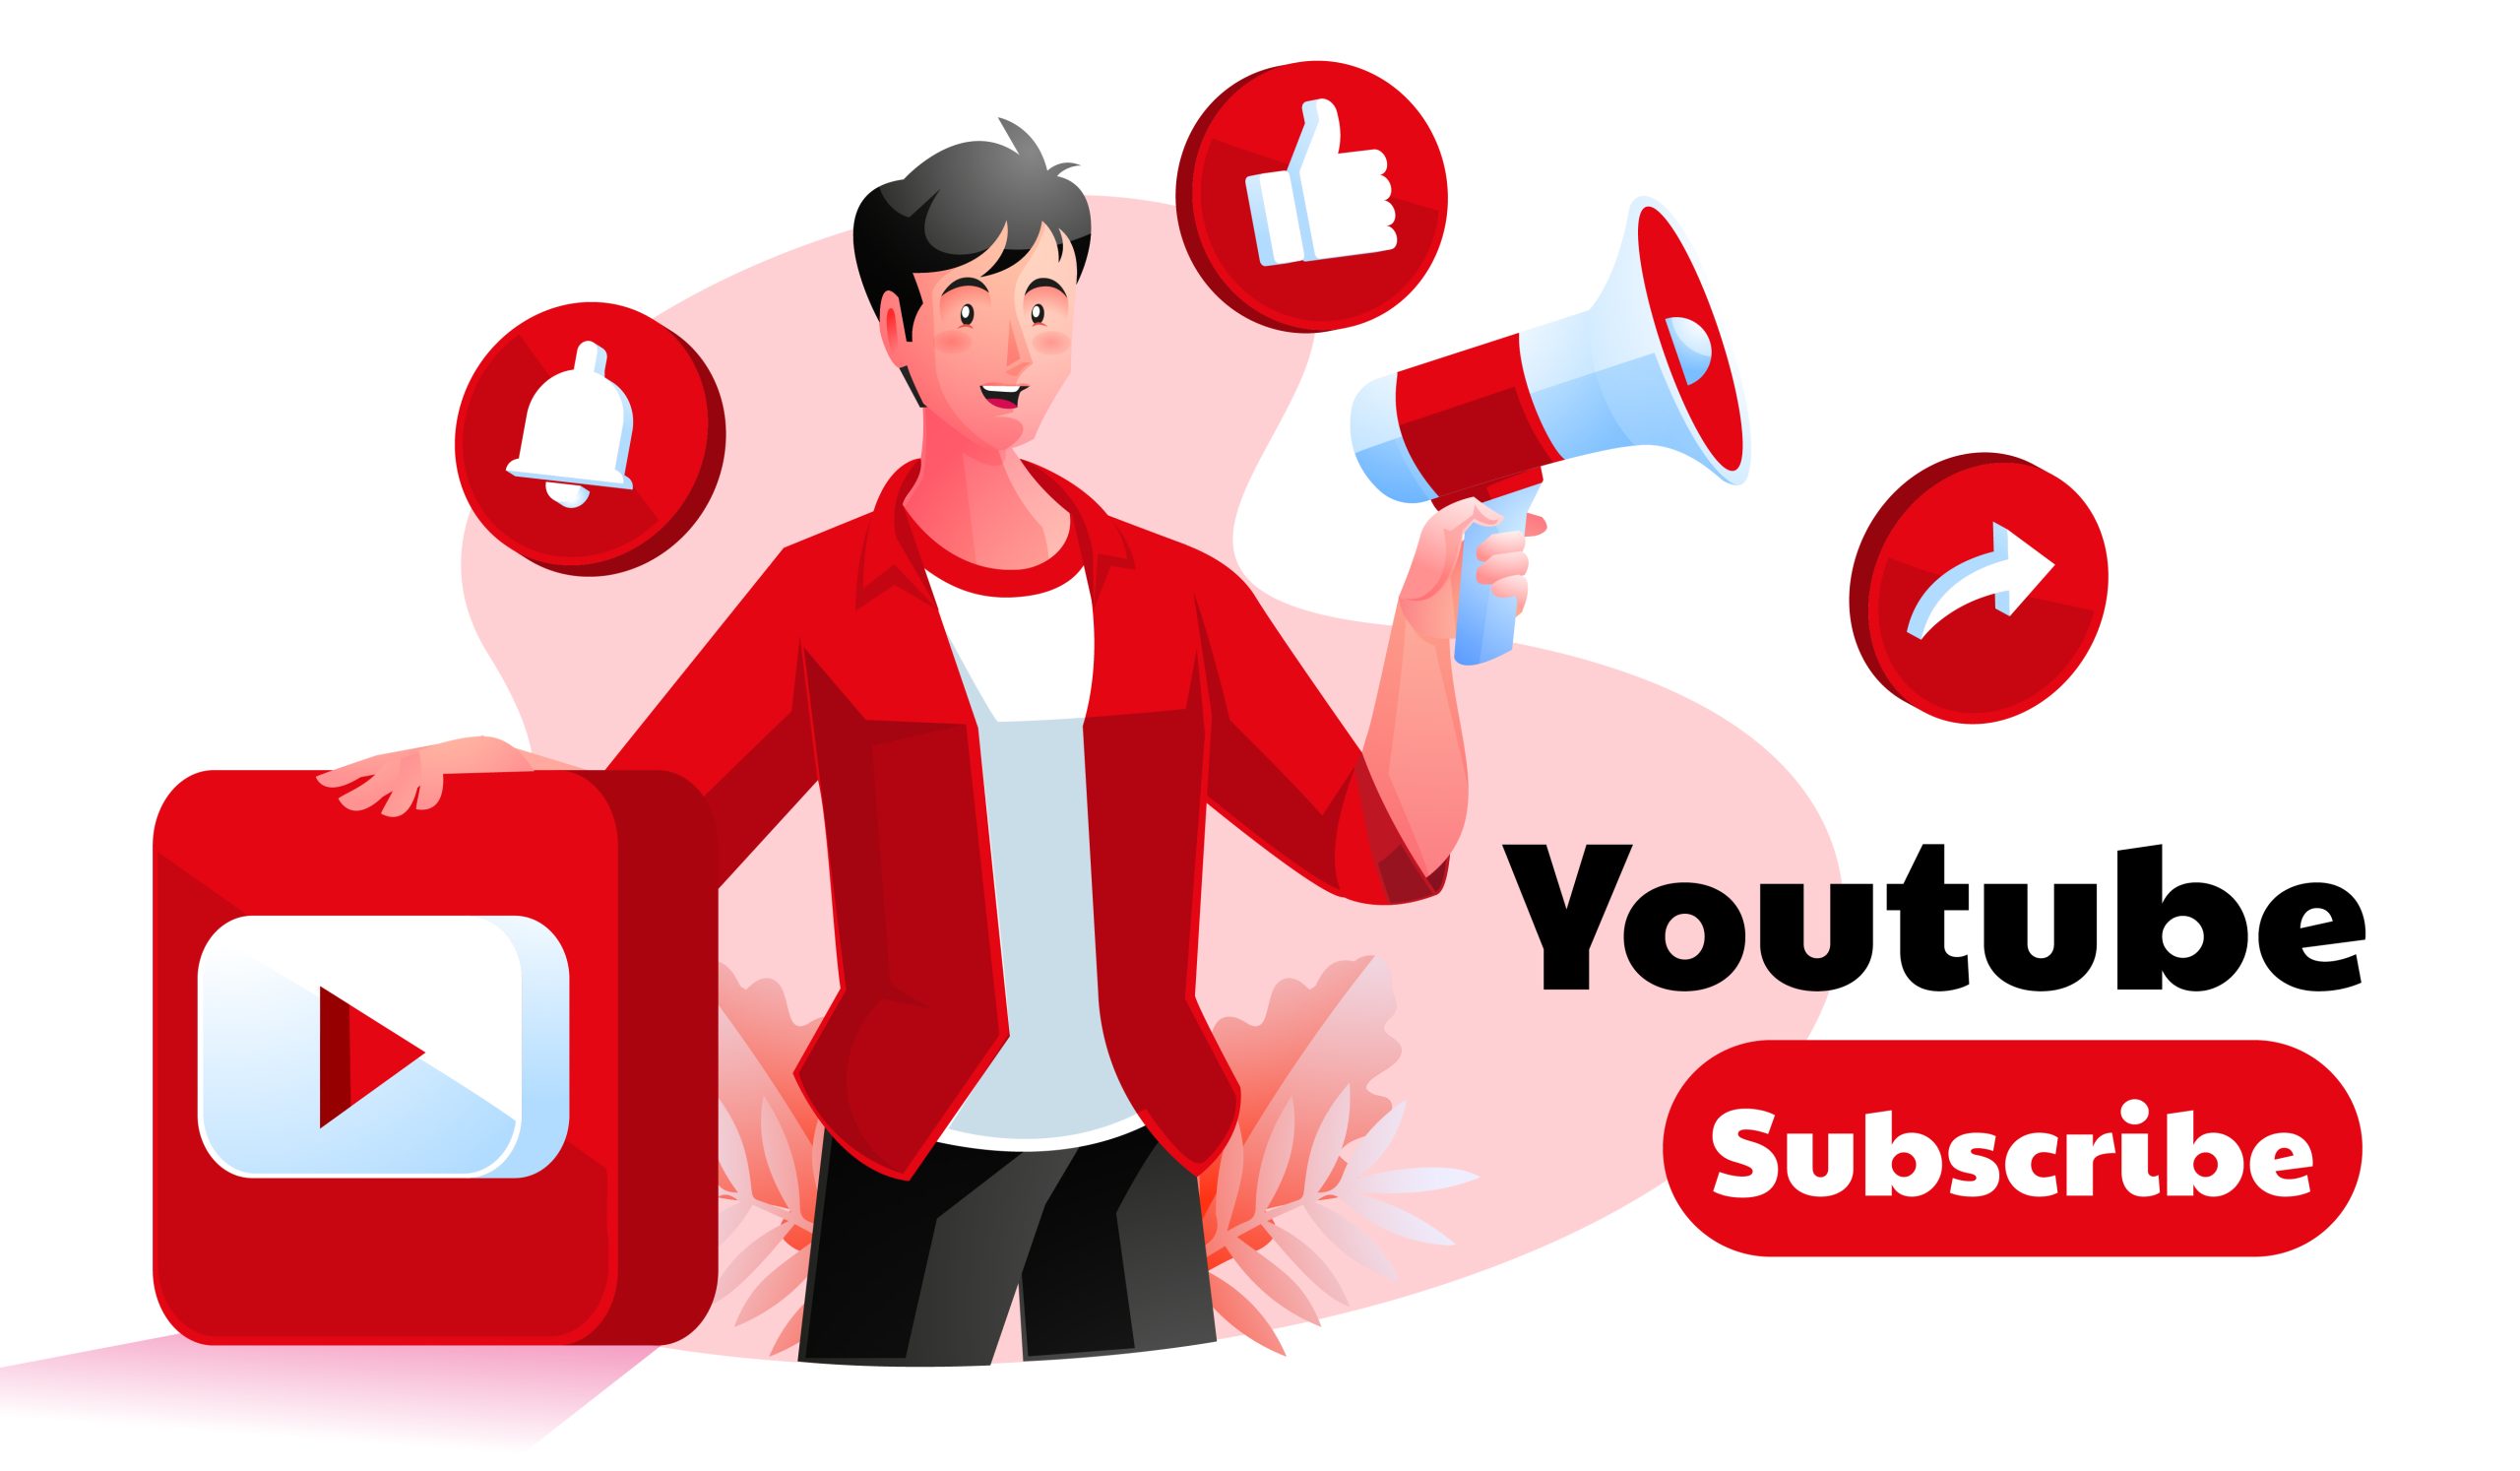 How to Get More YouTube Subscribers